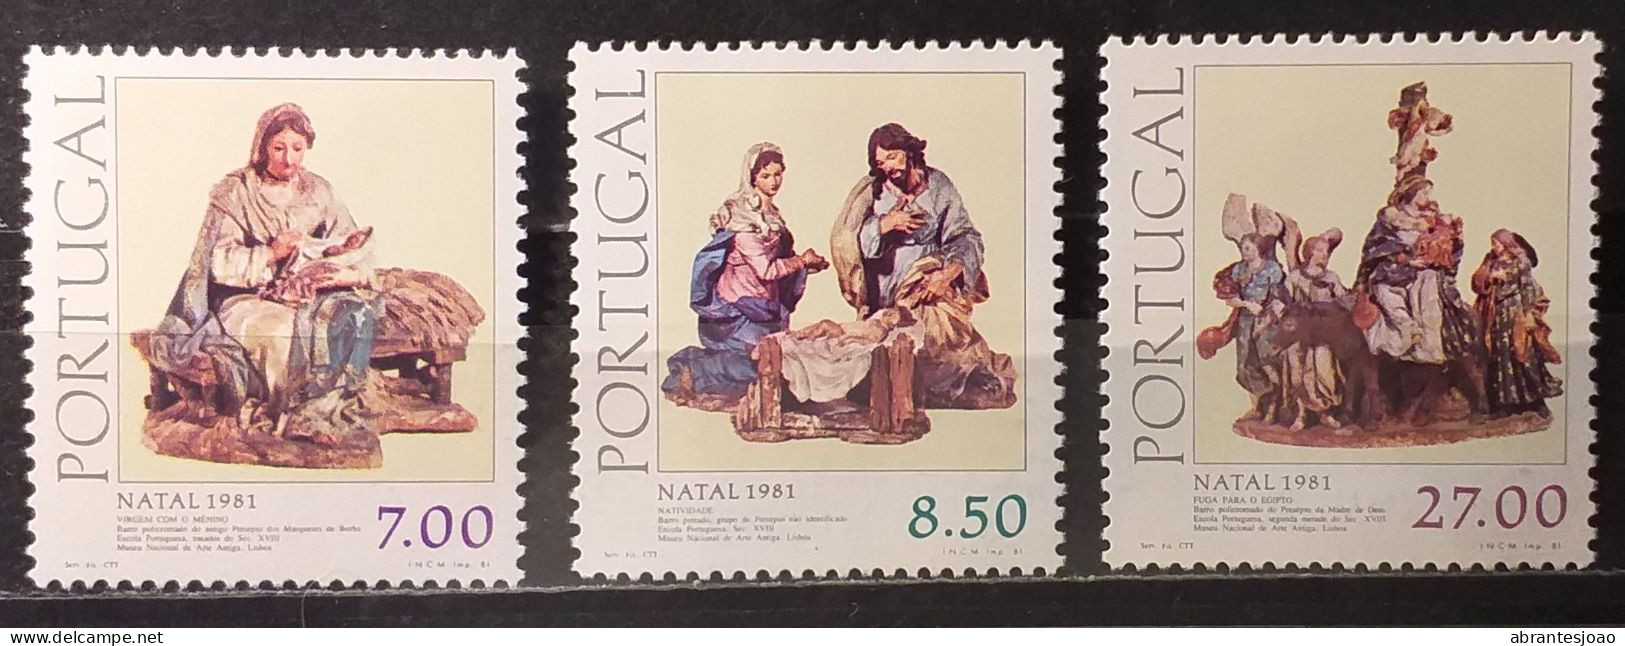 1981 - Portugal - MNH - 5th. Centenary Of Access Of King John II To The Throne + Christmas - 5 Stamps - Neufs